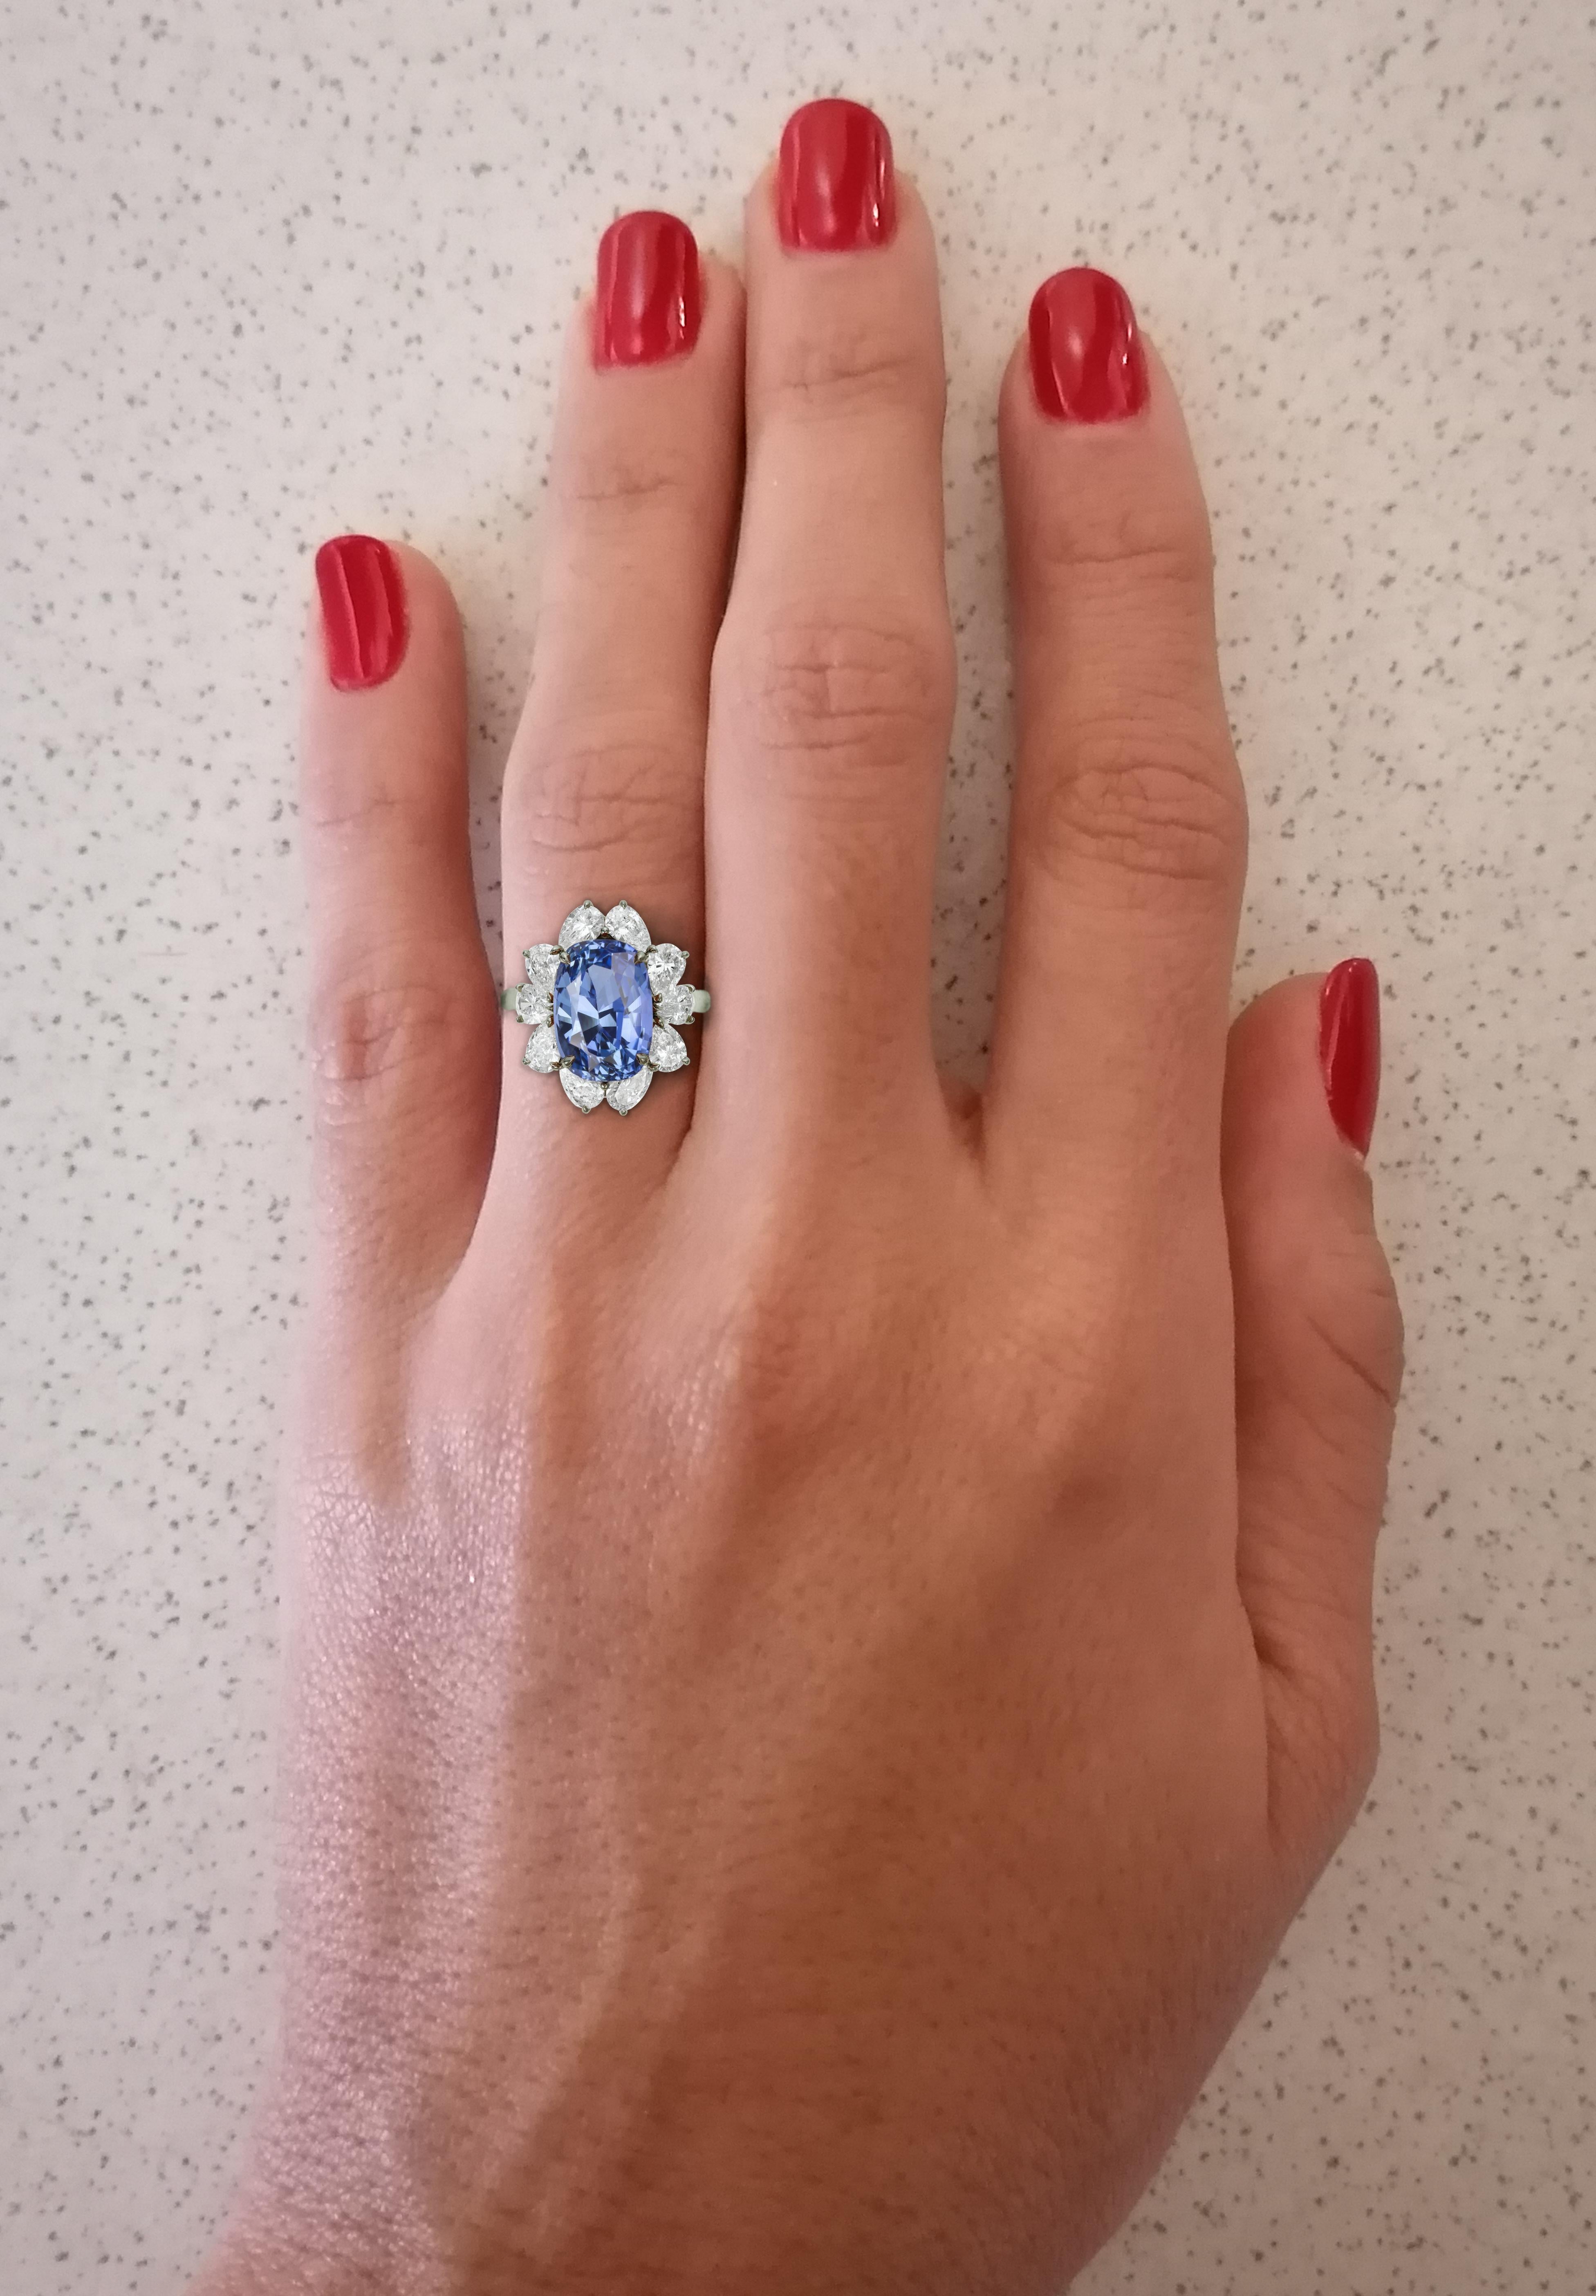 This is an exquisite ring handmade in Italy with a 5 carat GIA certified sapphire and pear cut diamonds platinum ring. This ring comes with 11 GIA certificates one from the blue sapphire and 10 from the pear cut diamonds. Every diamond has been